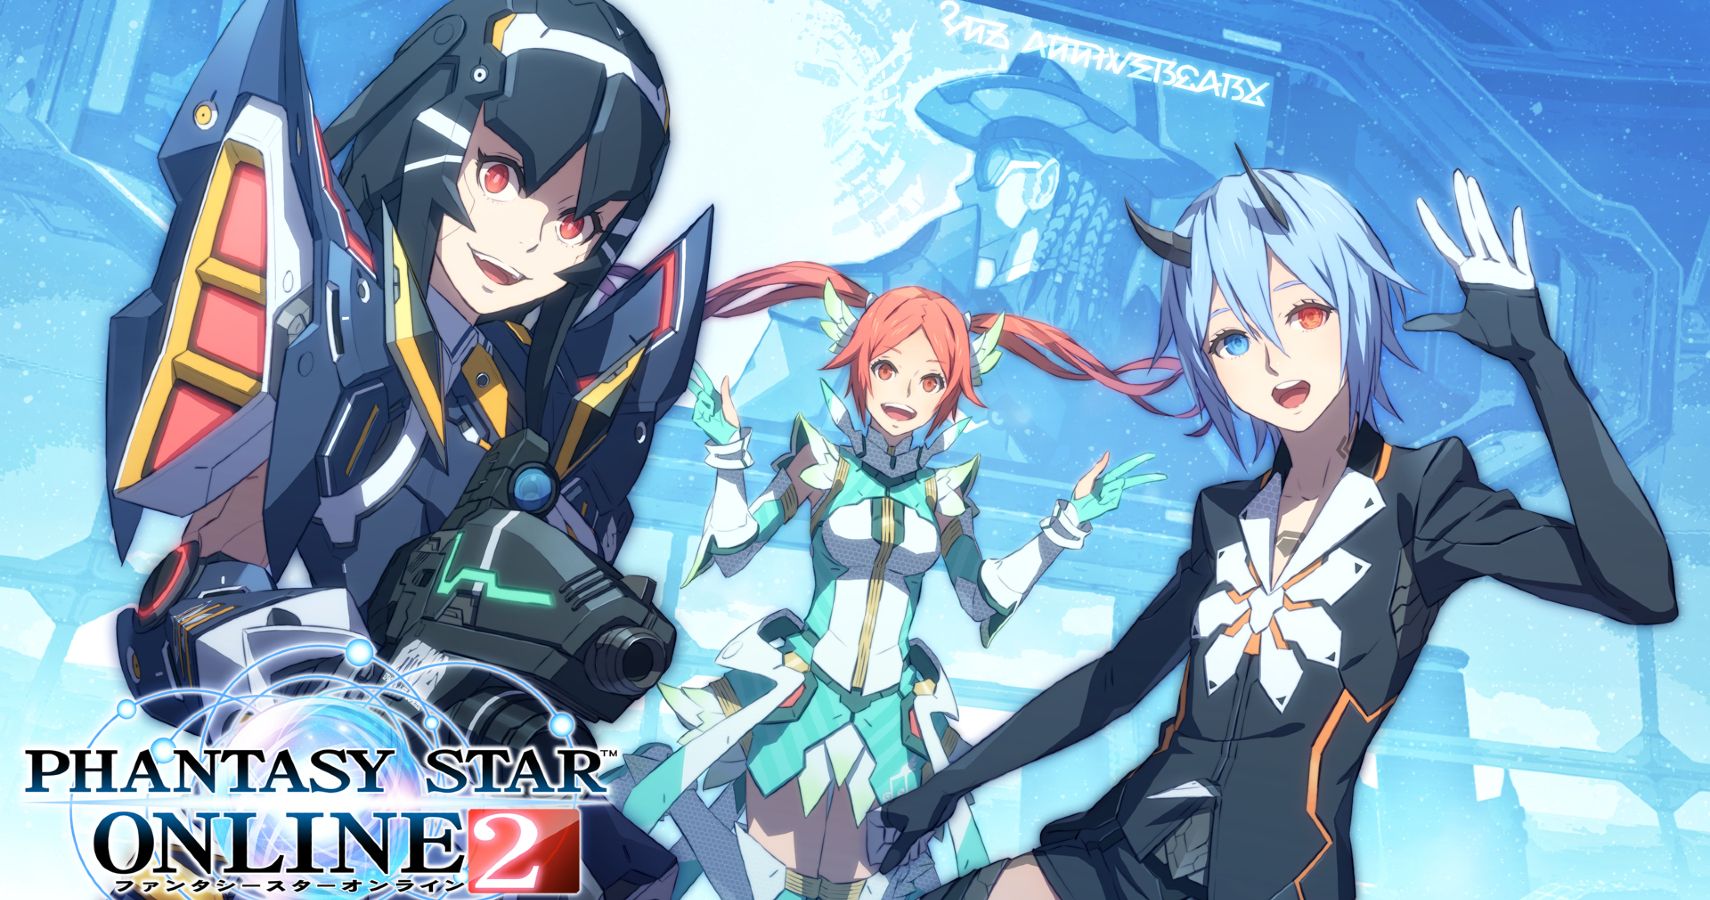 Female characters attached to the story of Phantasy Star Online 2.